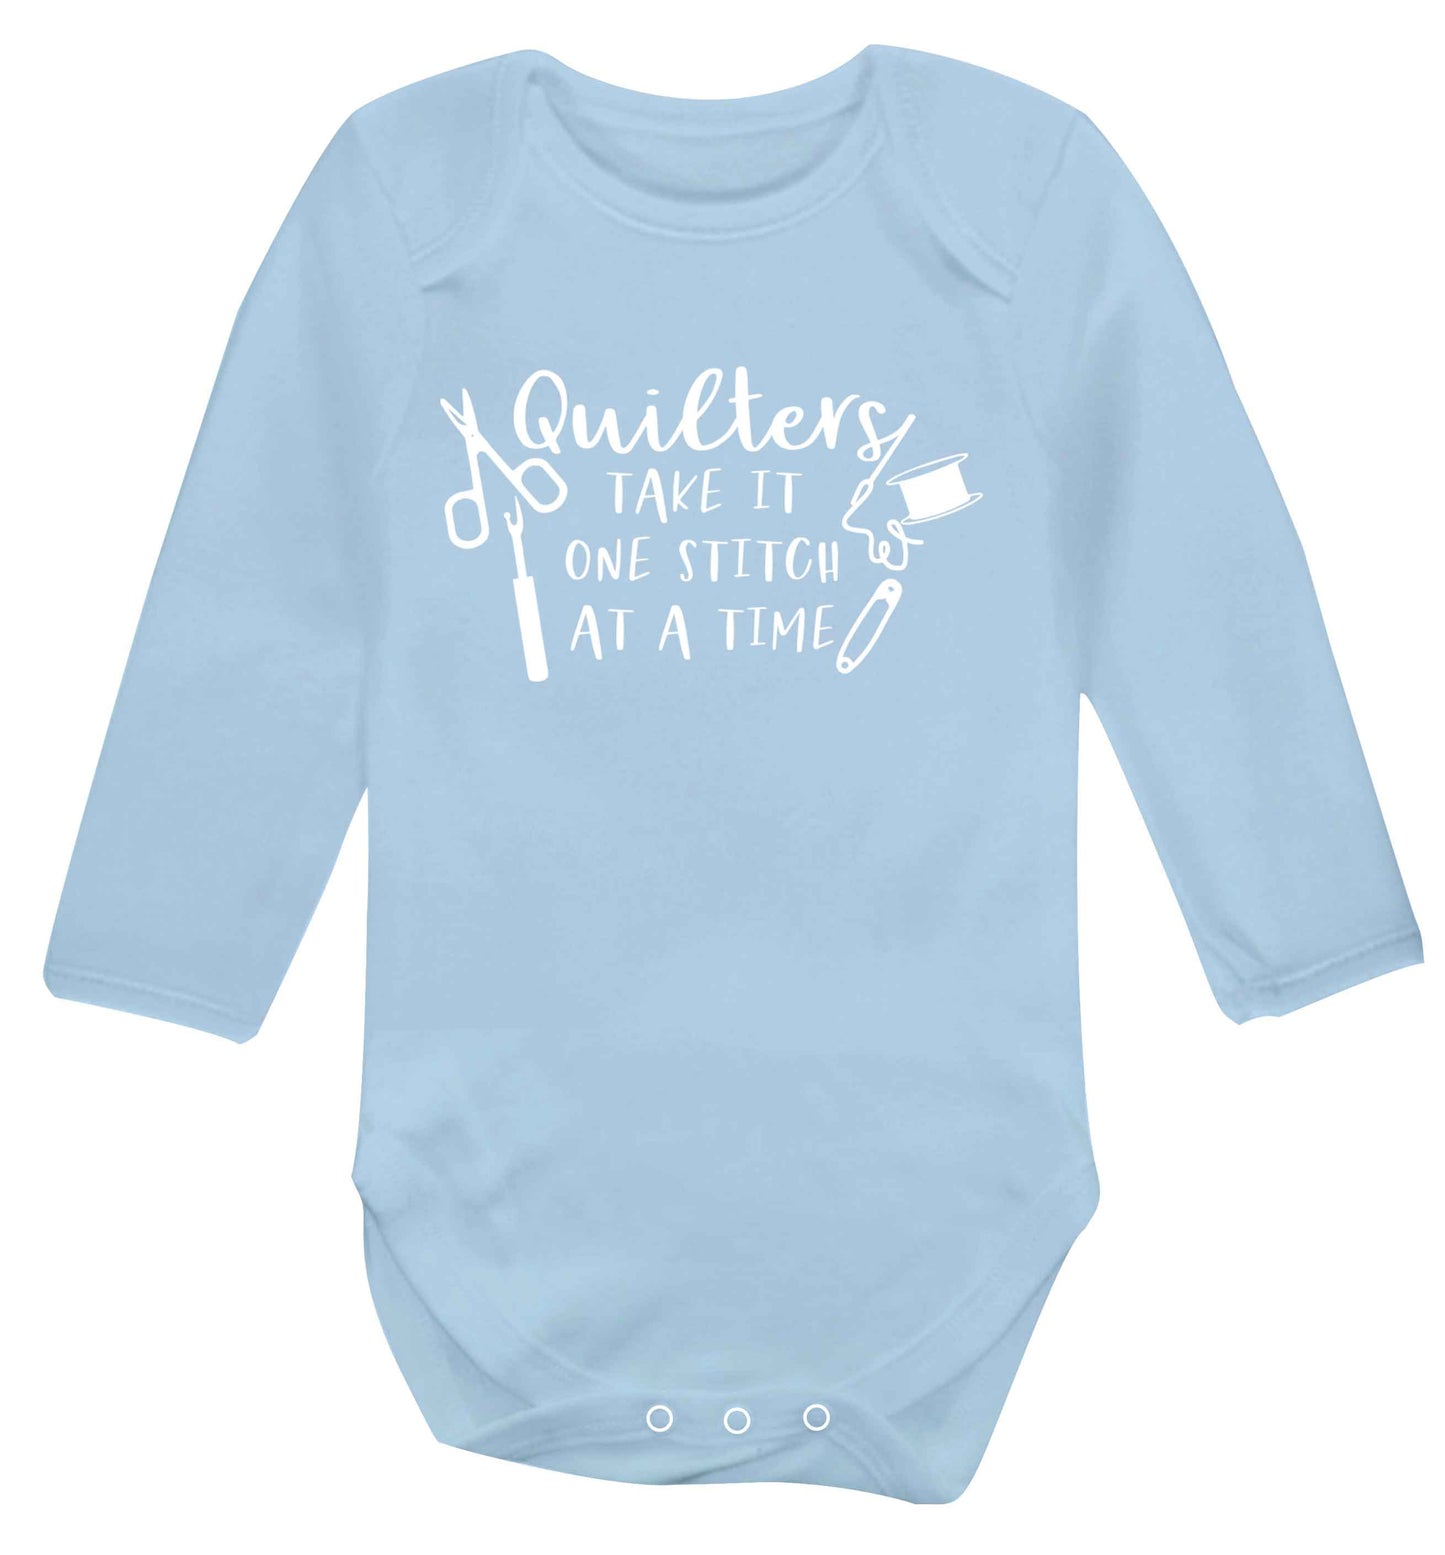 Quilters take it one stitch at a time  Baby Vest long sleeved pale blue 6-12 months